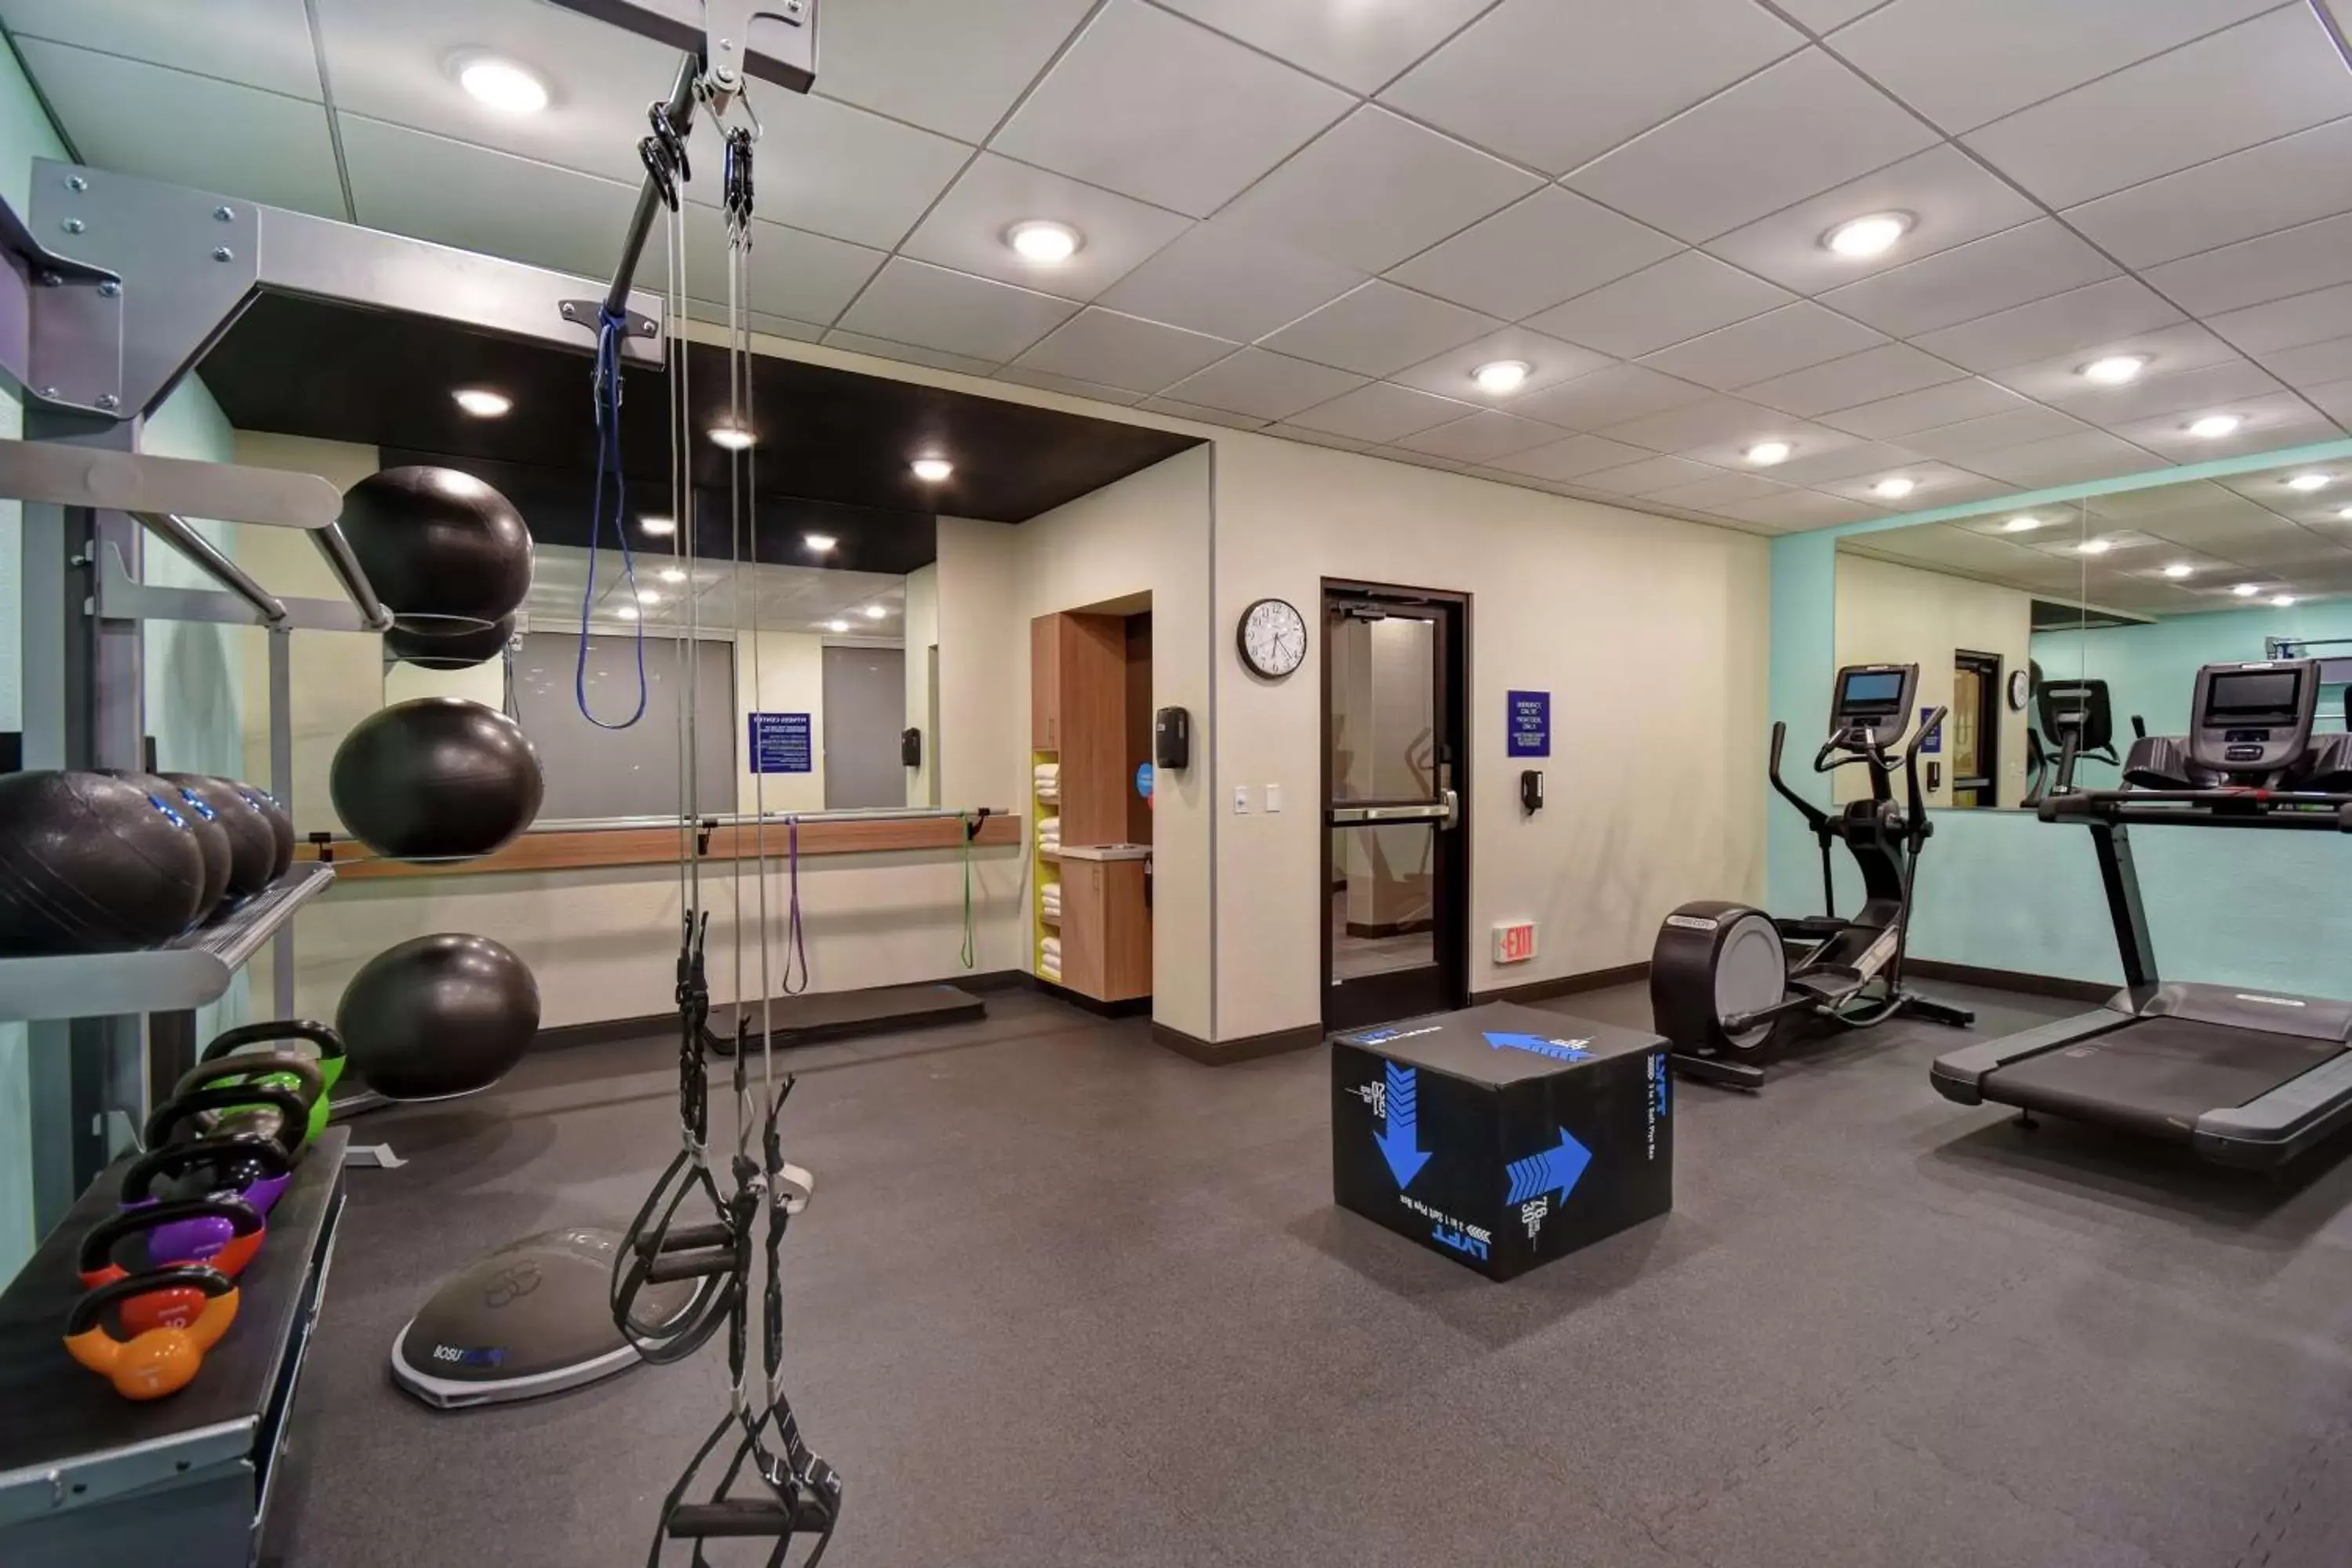 Fitness centre/facilities, Fitness Center/Facilities in Tru By Hilton Denver South Park Meadows, Co